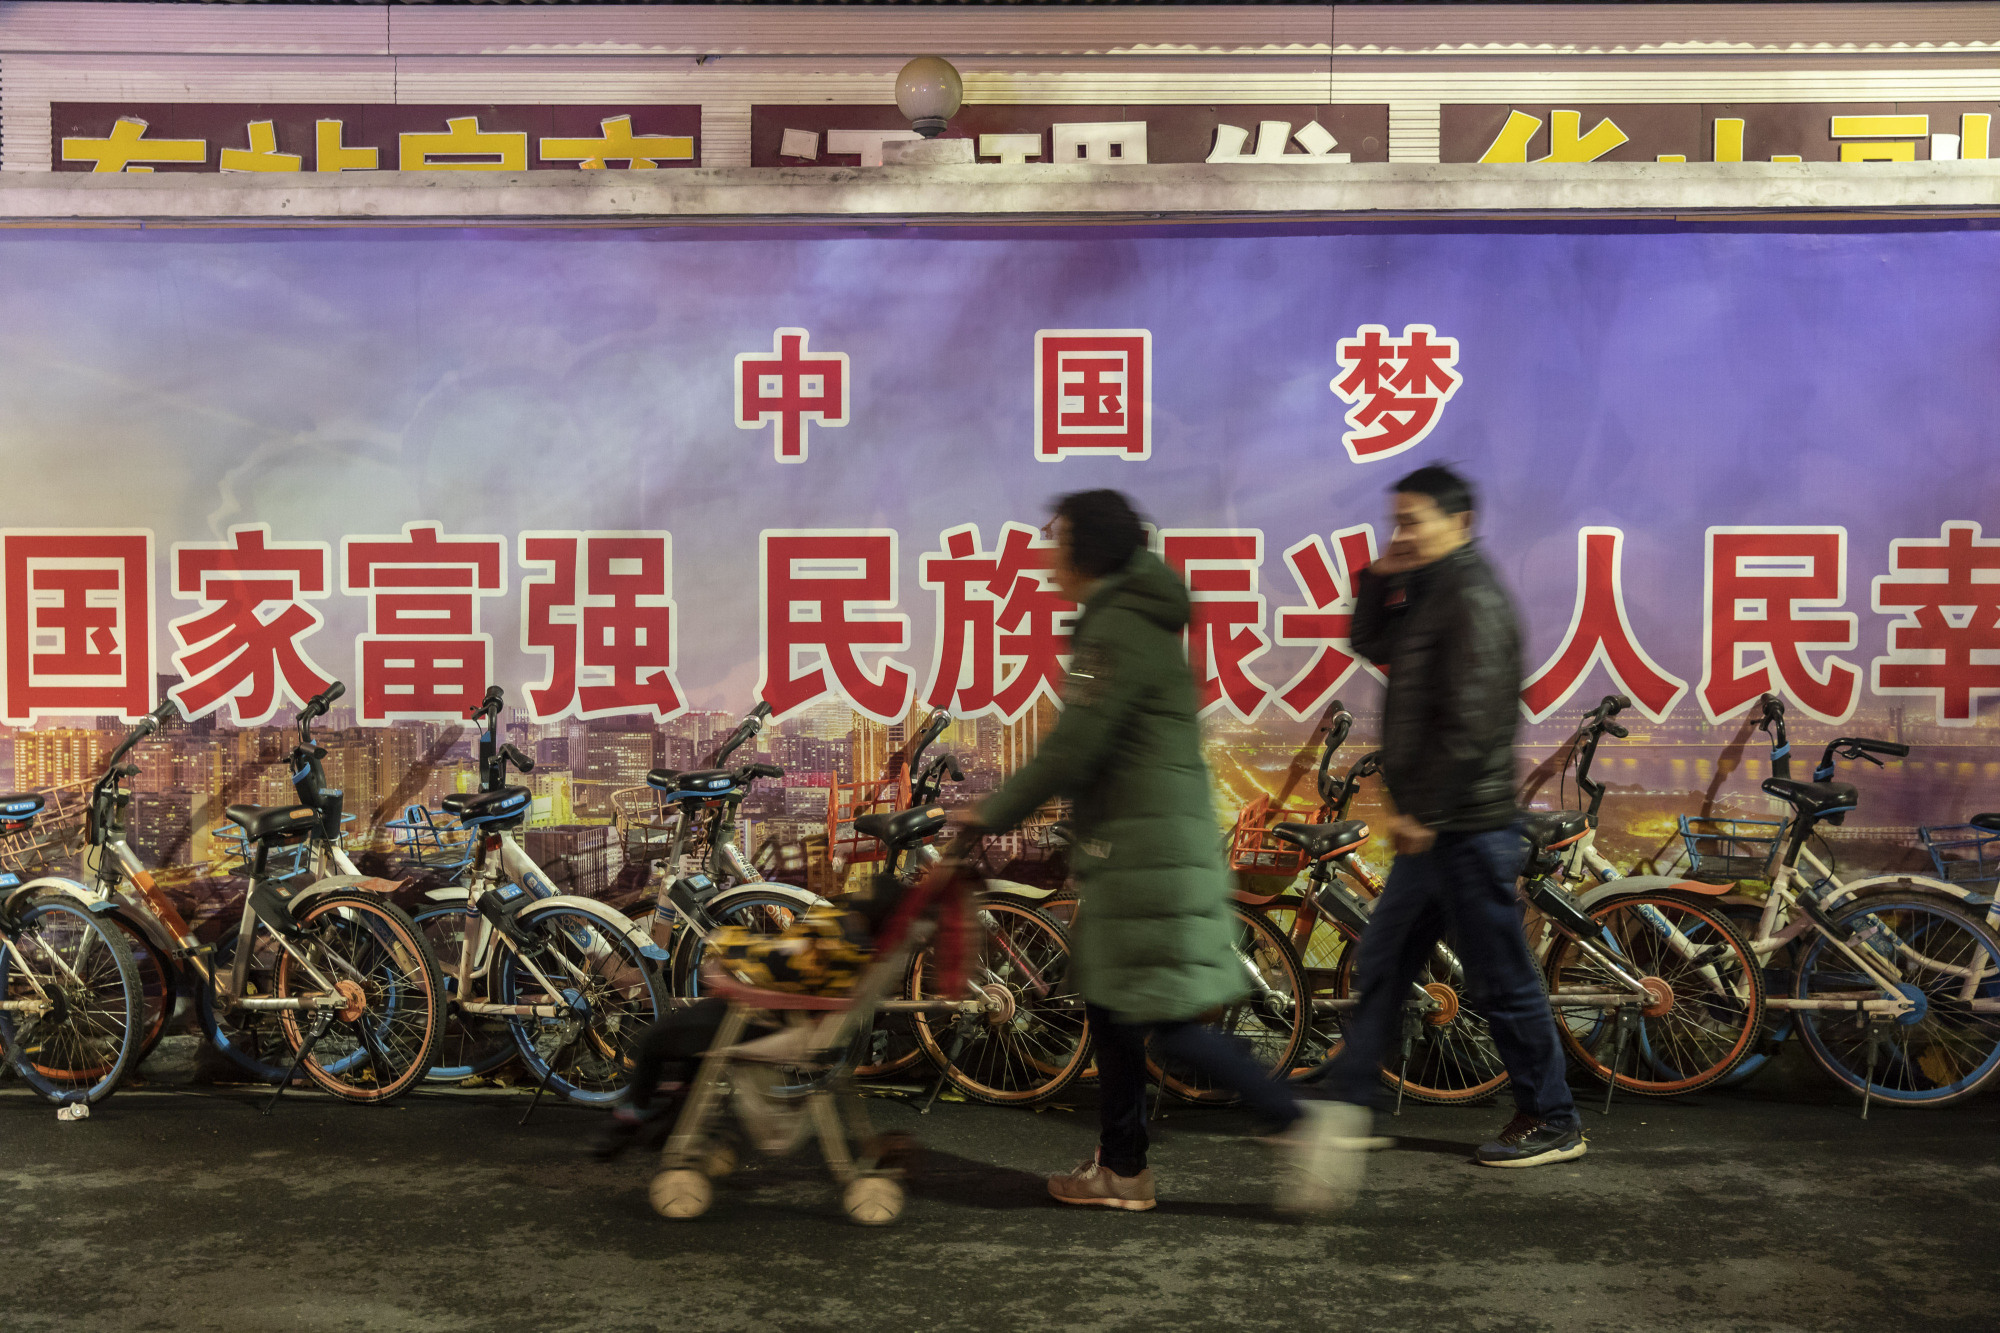 Pedestrians in walk past a government mural referencing the 'Chinese Dream' in the city of Wuhan, Hubei province, on Dec. 9. | BLOOMBERG